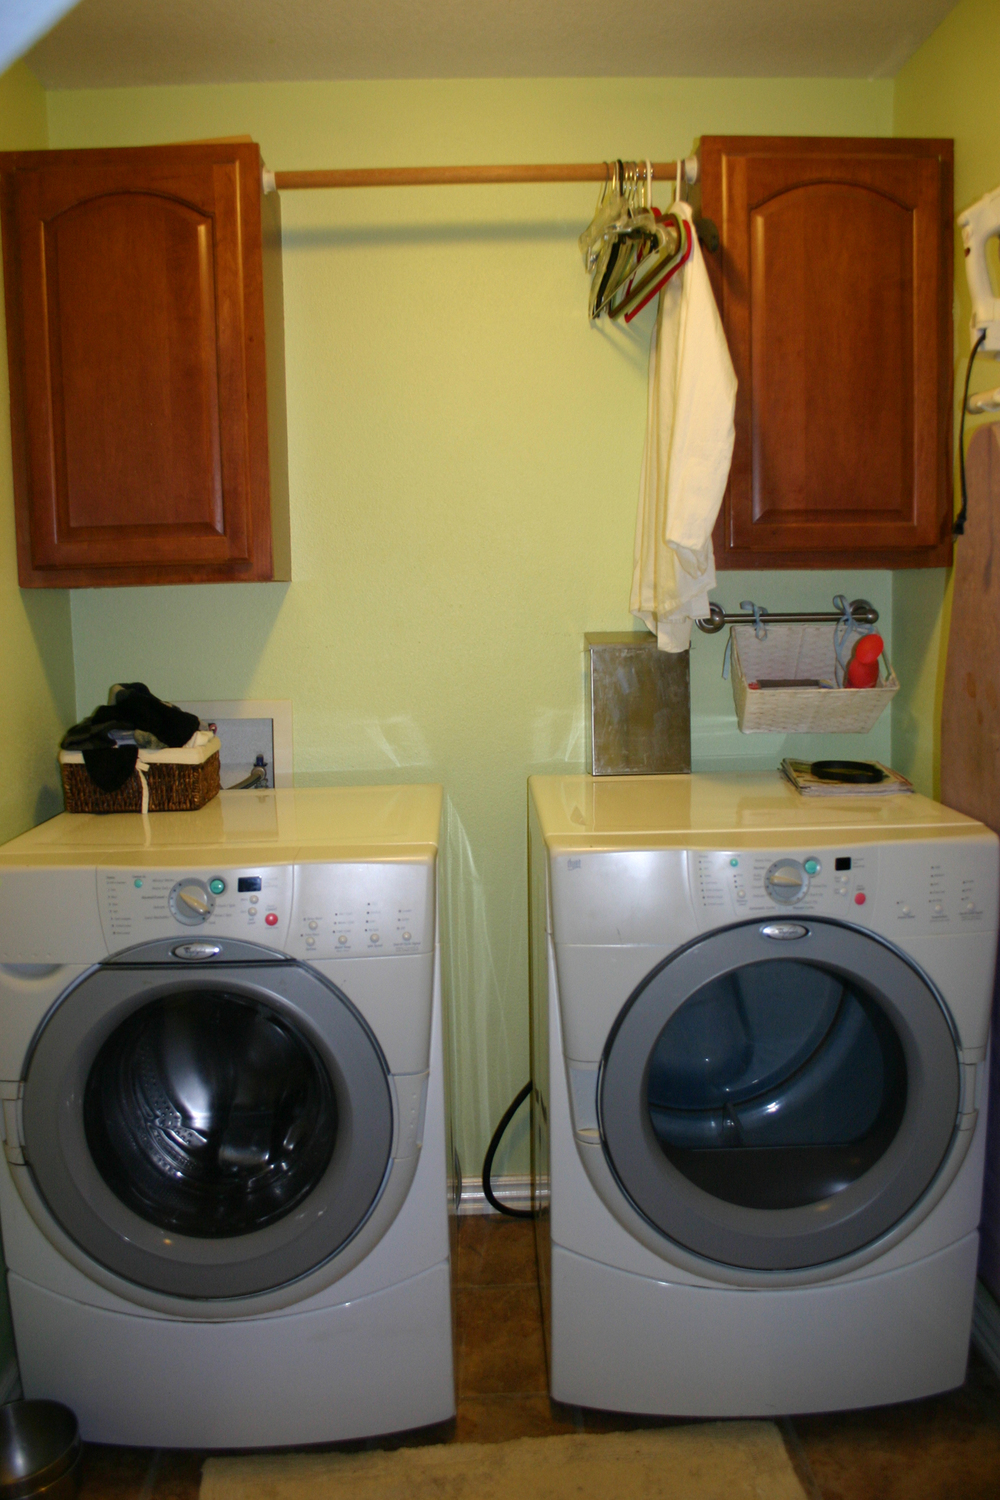 Laundry Room Reveal Updated, How To Remove Laundry Room Cabinets